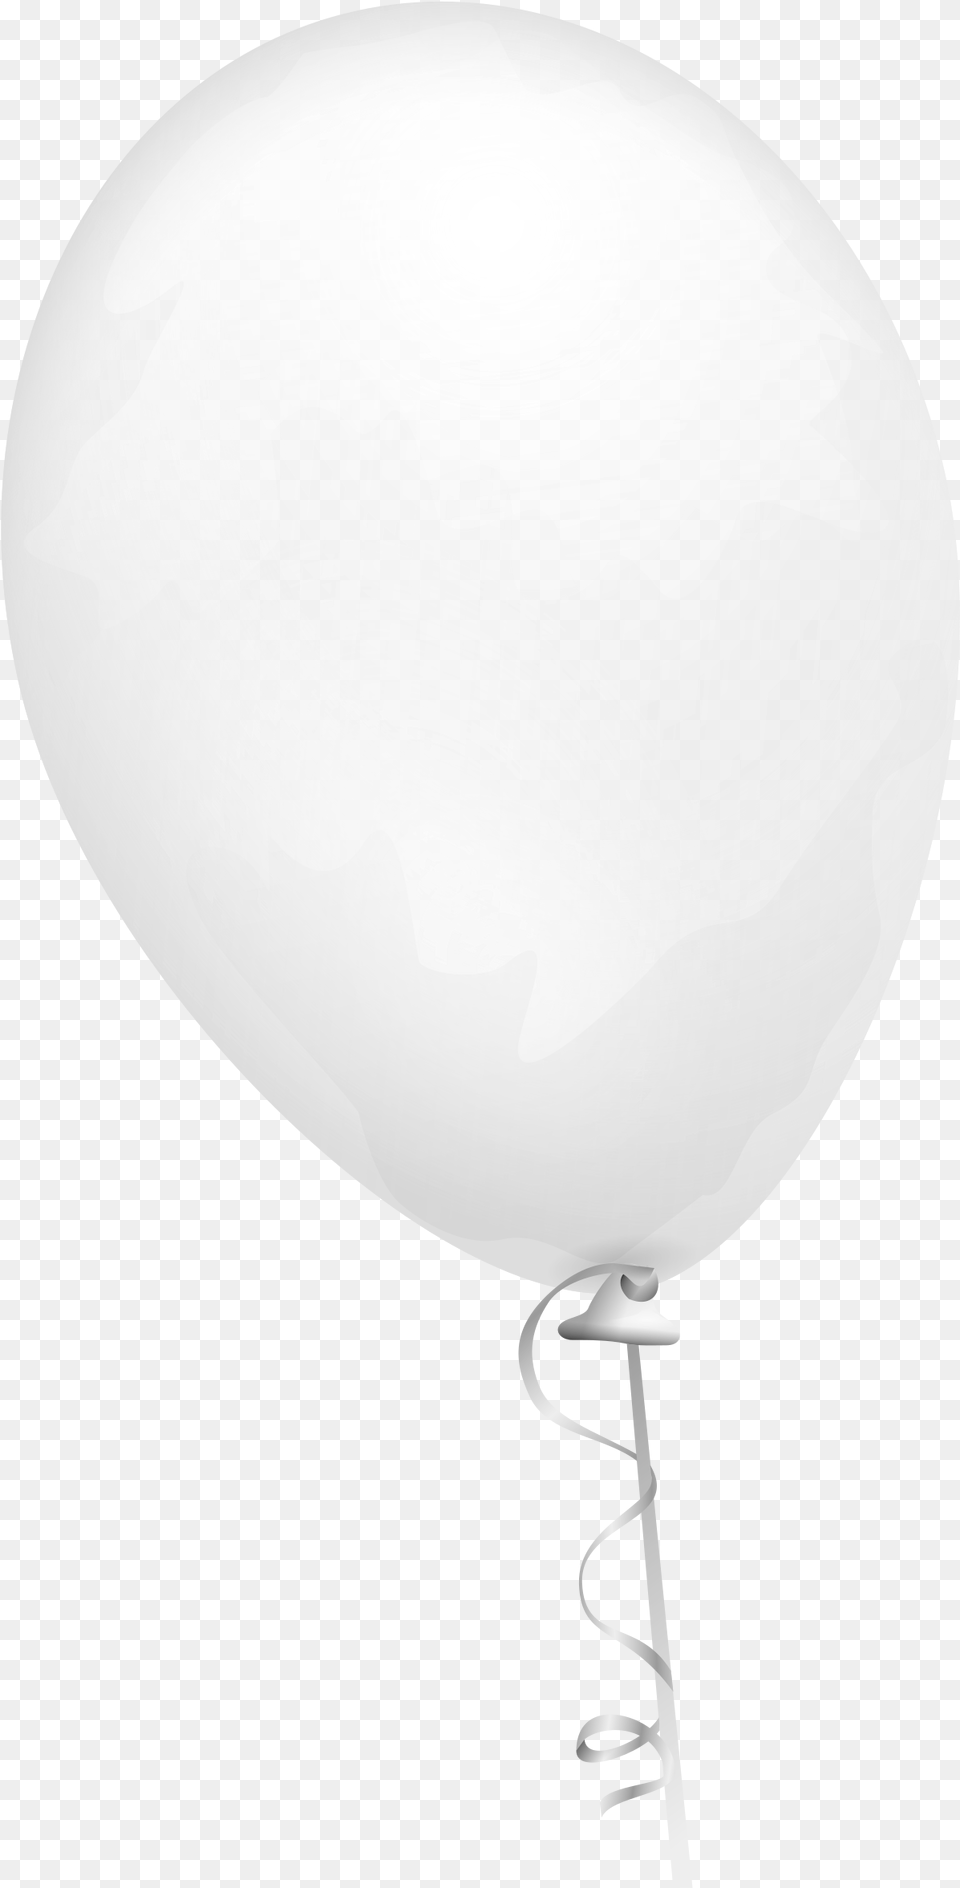 Big Transparent Background White Balloon On Transparent Free Png Download